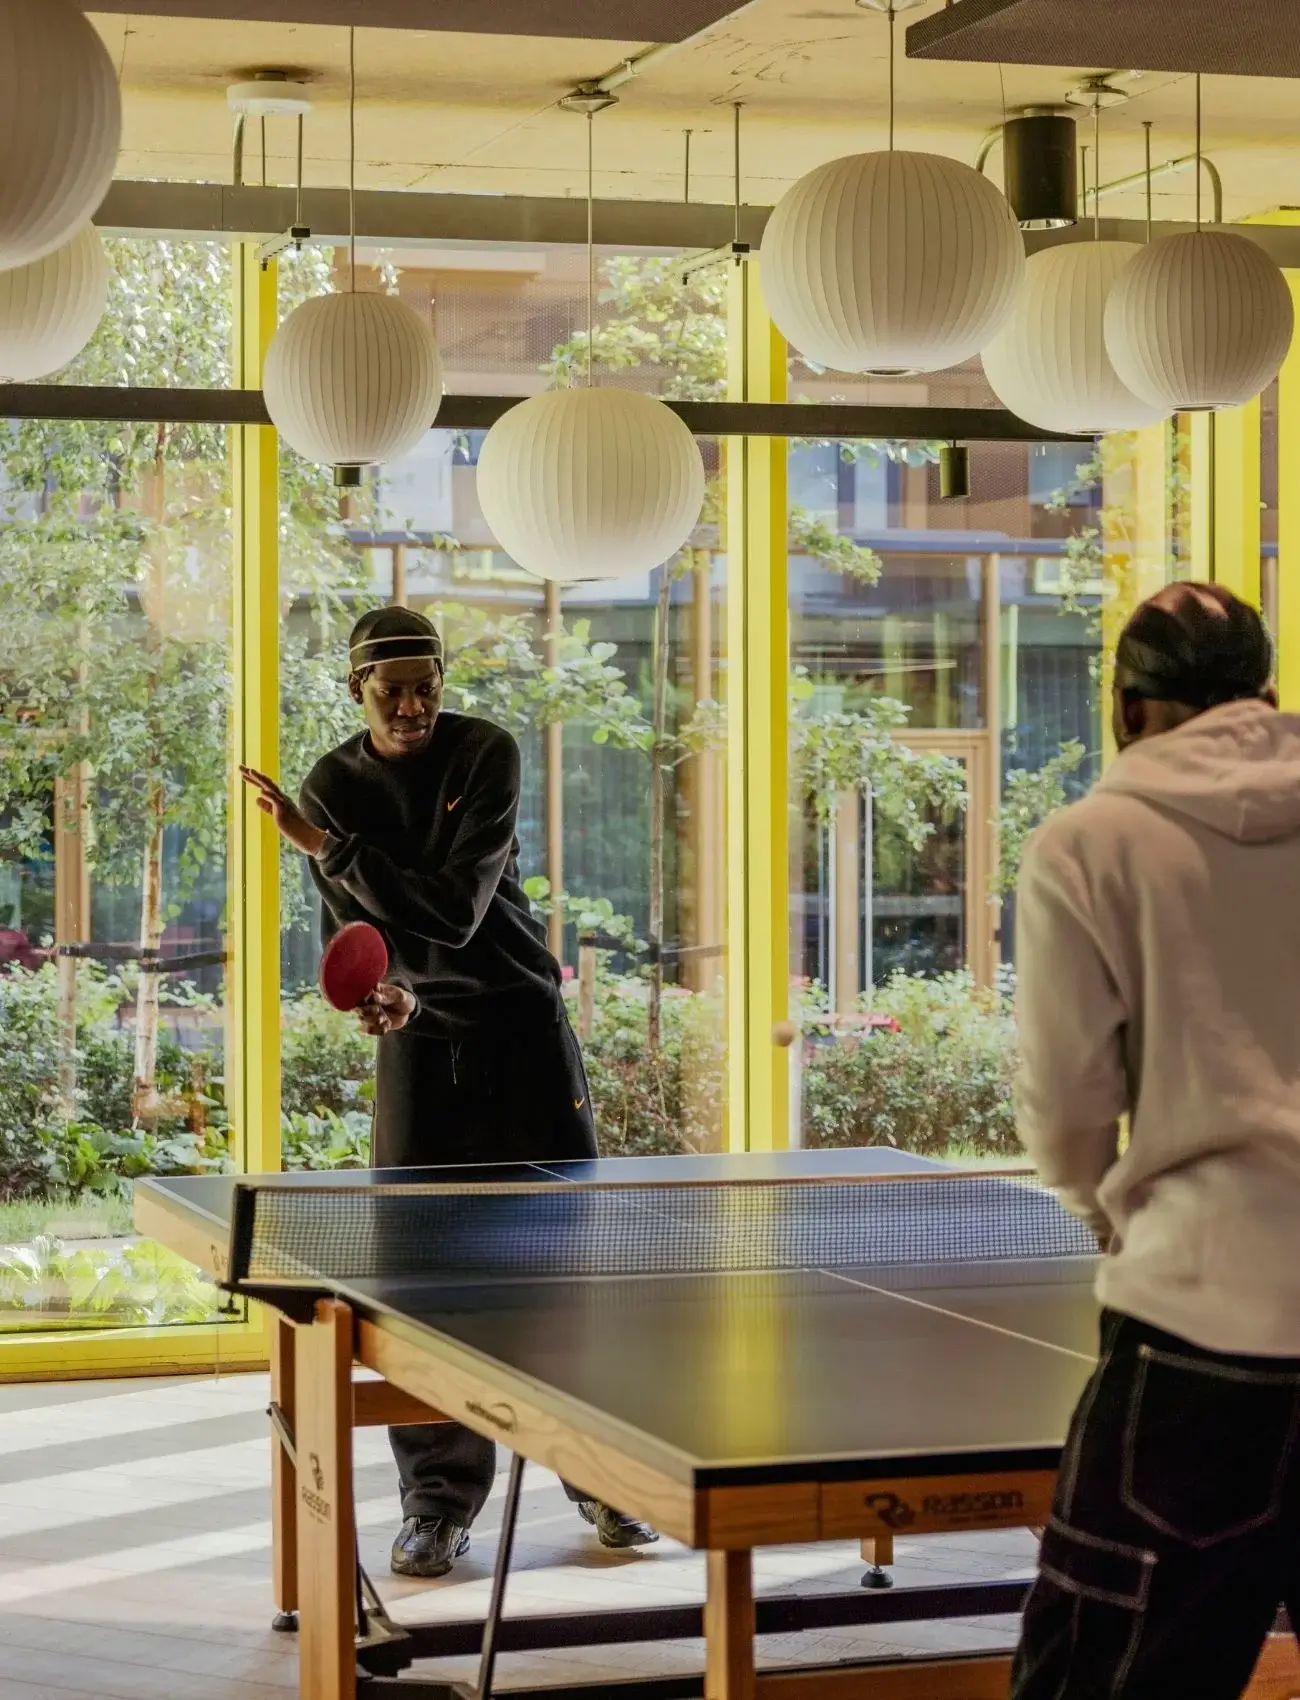 03 scape residents playing table tennis portrait